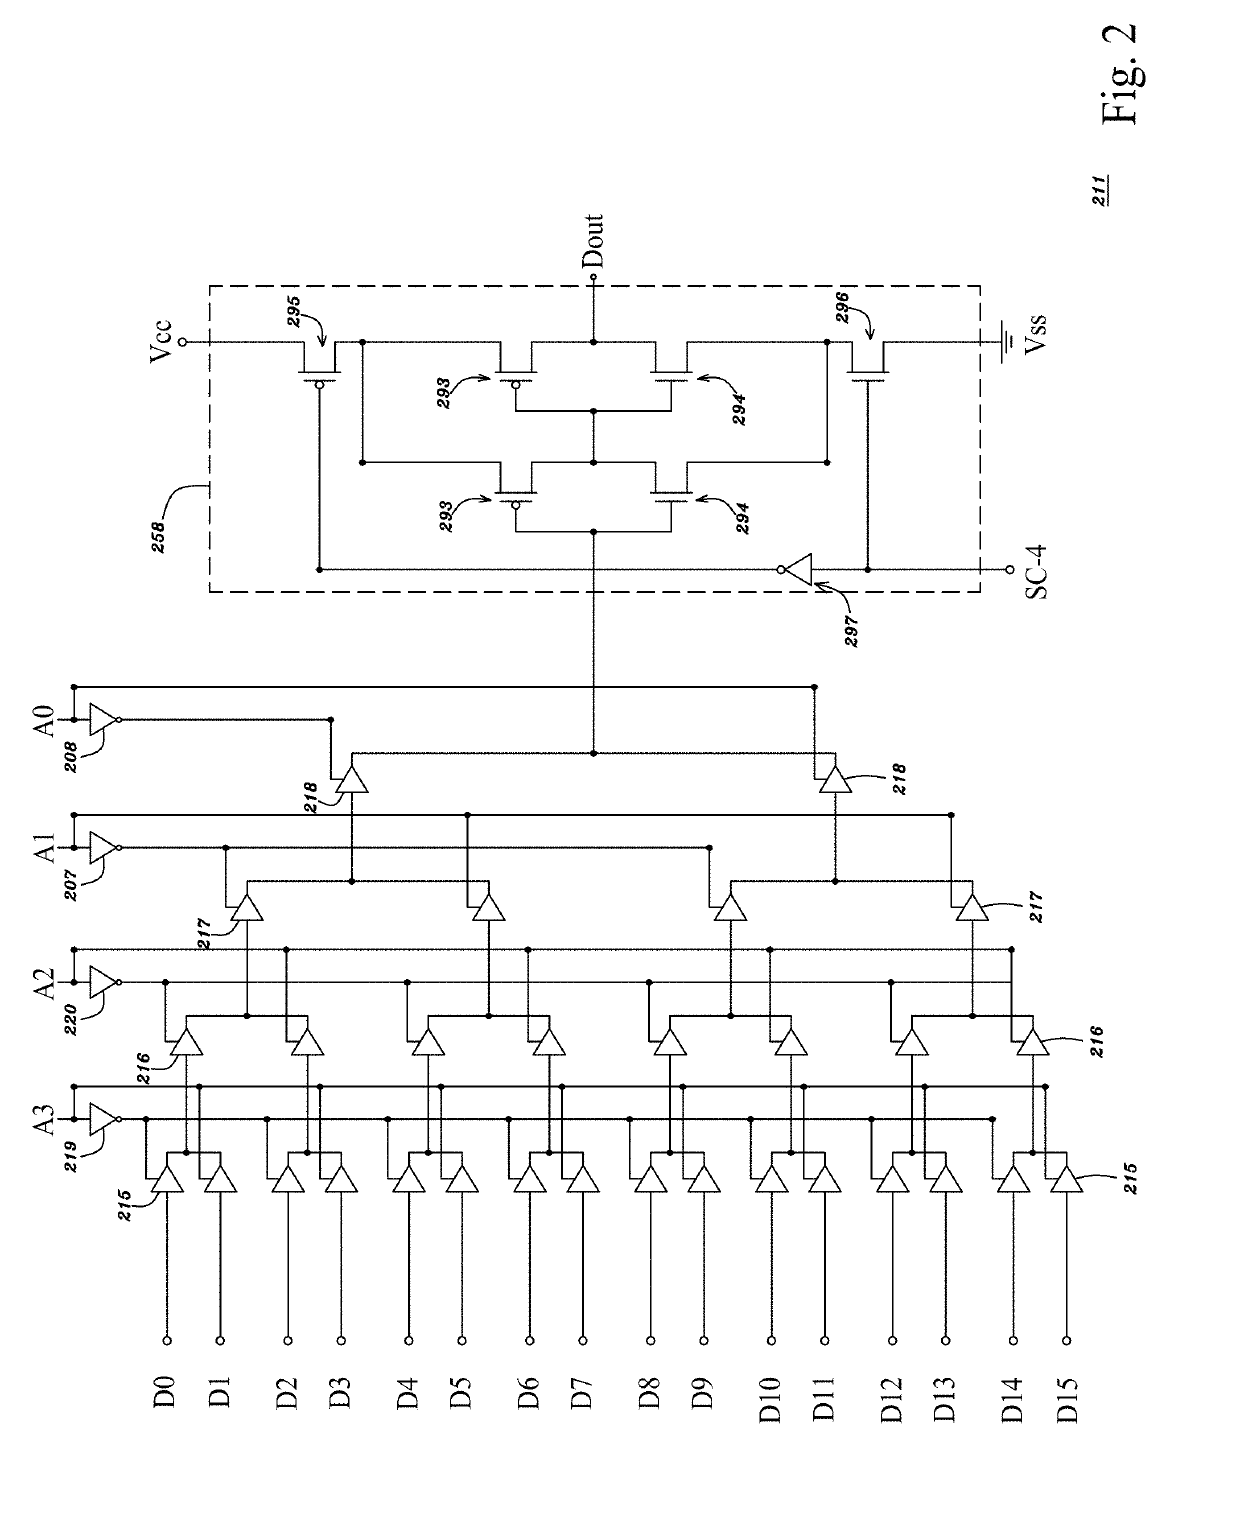 Logic drive using standard commodity programmable logic IC chips comprising non-volatile random access memory cells